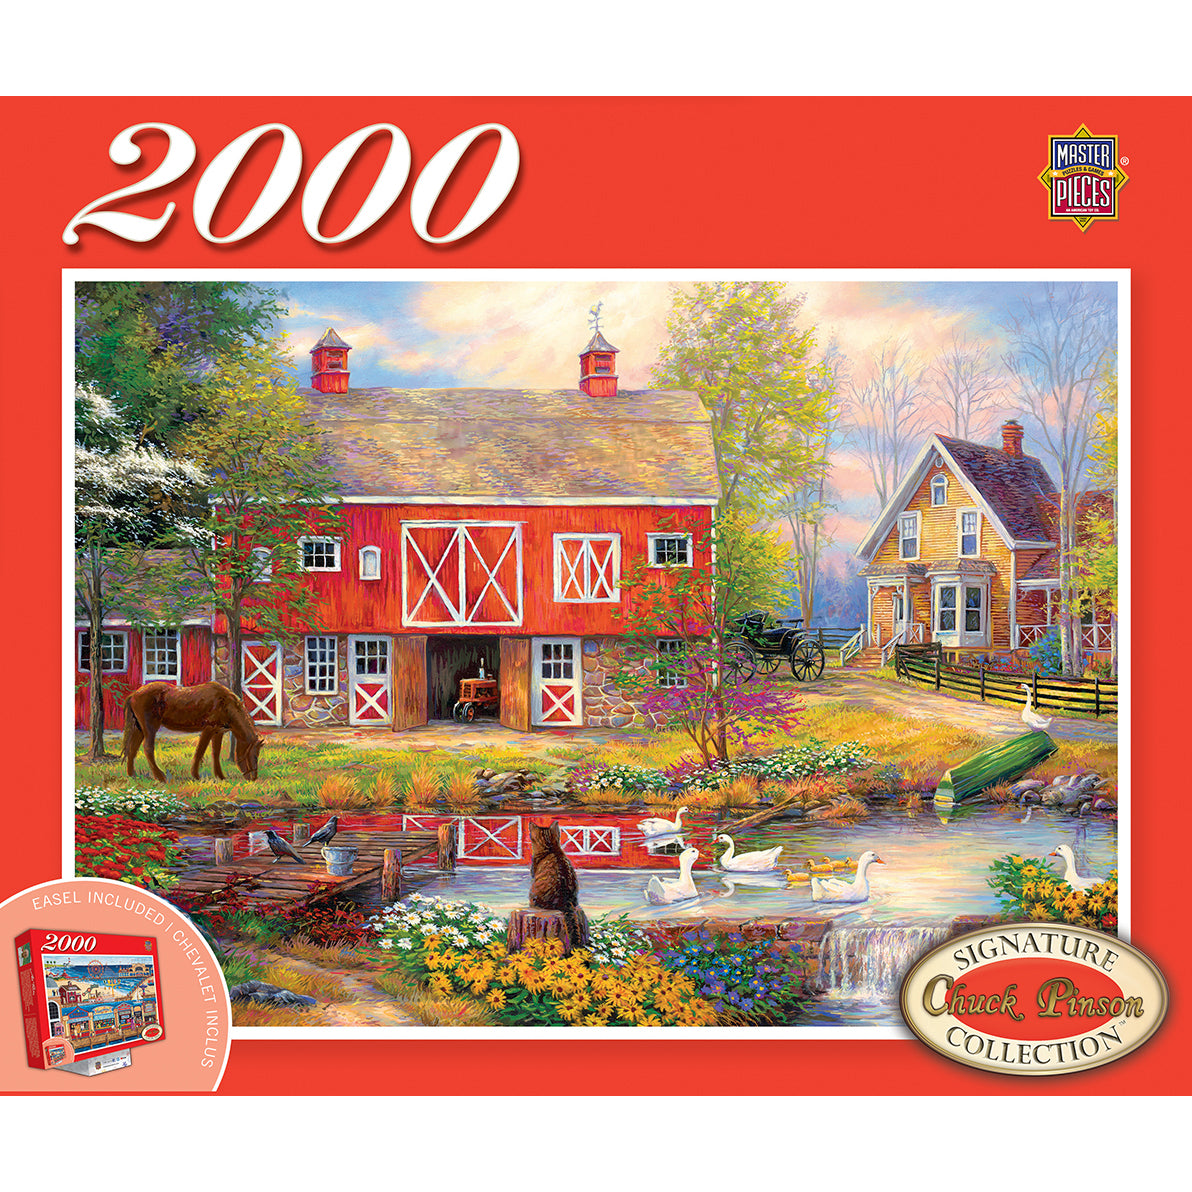 Give Mom the Gift of a Puzzle Easel and Puzzles by Ravensburger